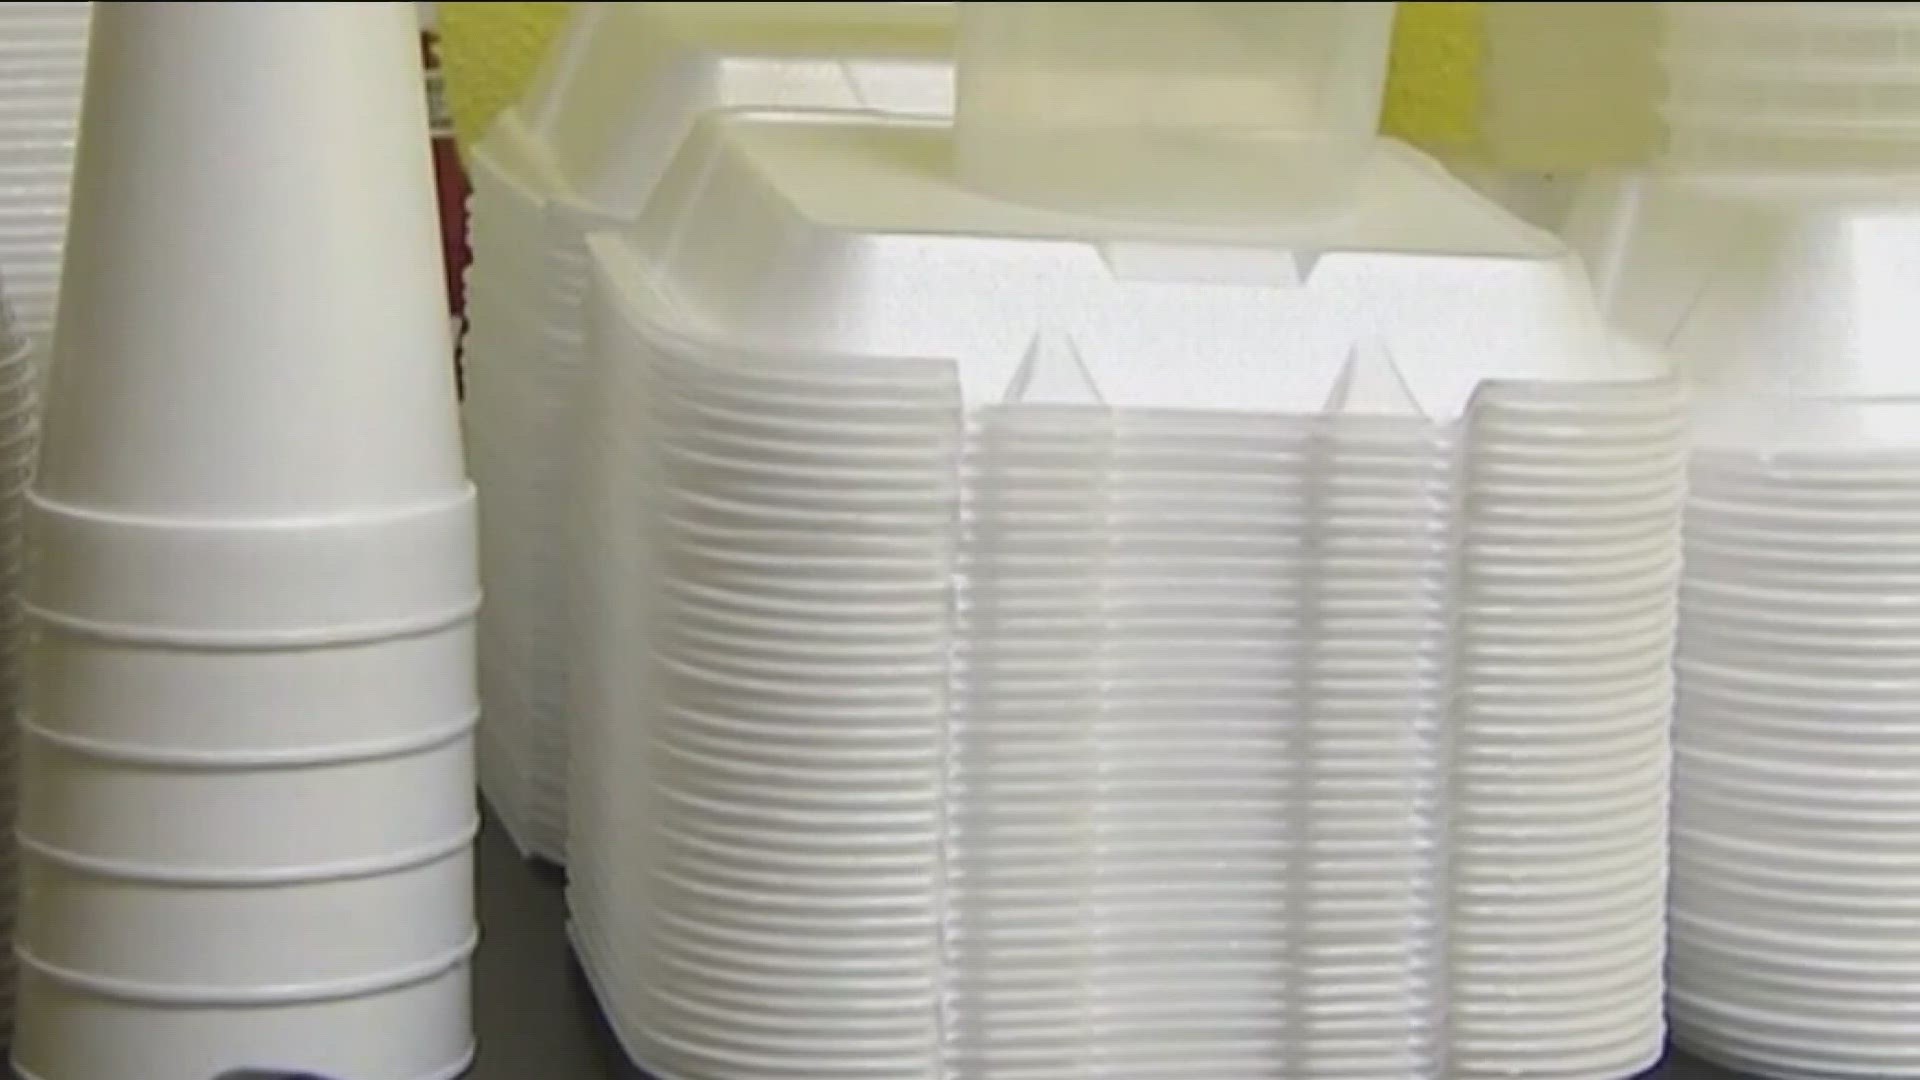 Styrofoam is officially banned in San Diego.